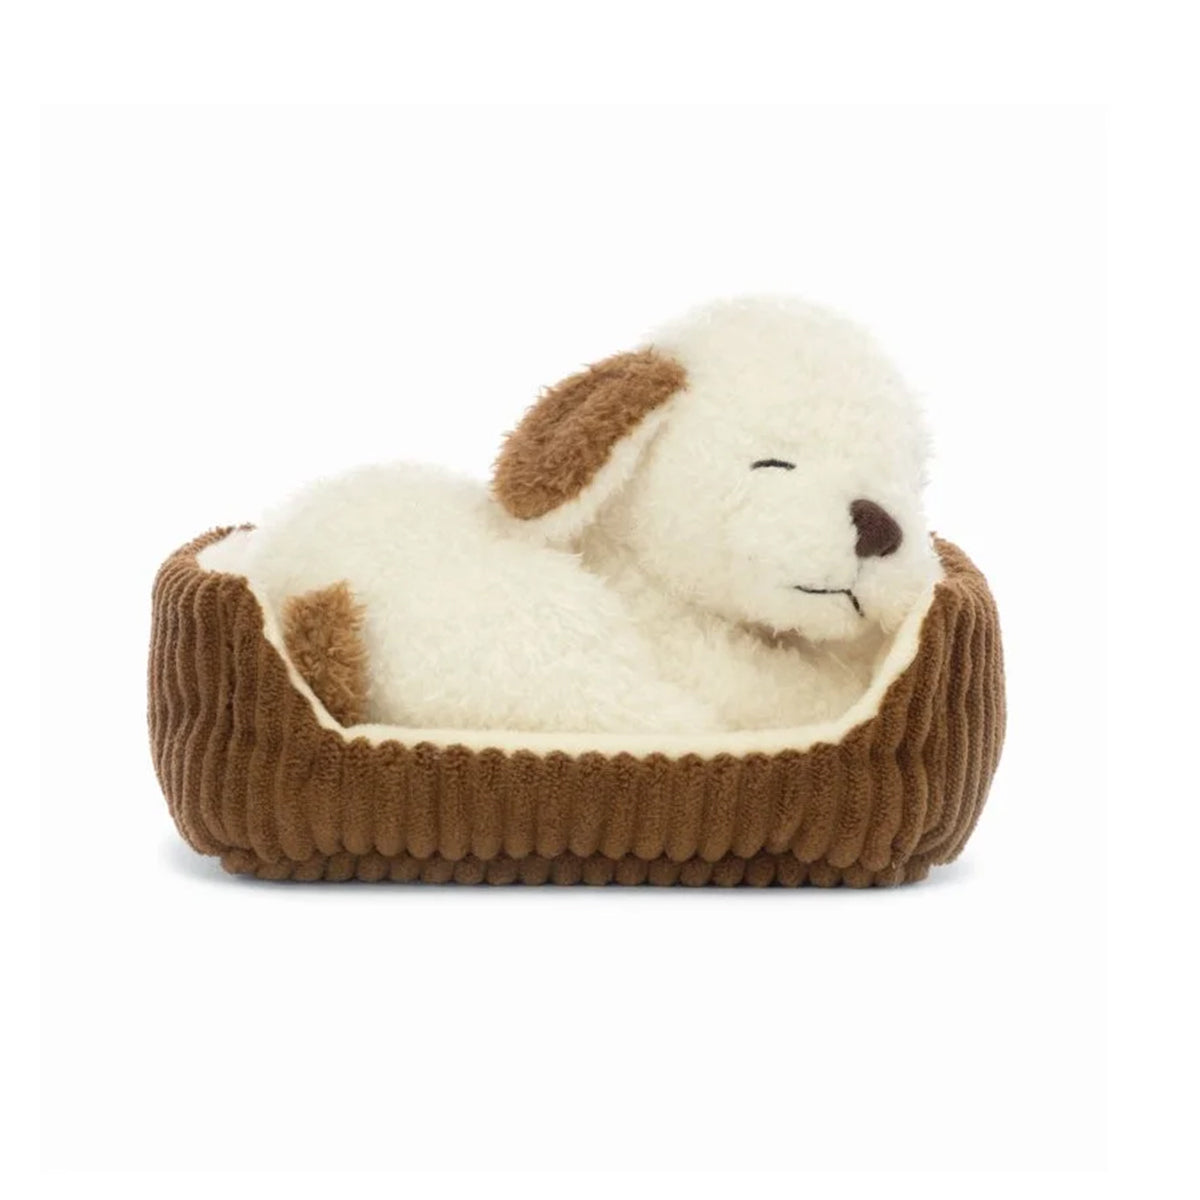 Jellycat Napping Nipper Dog Plush Toy